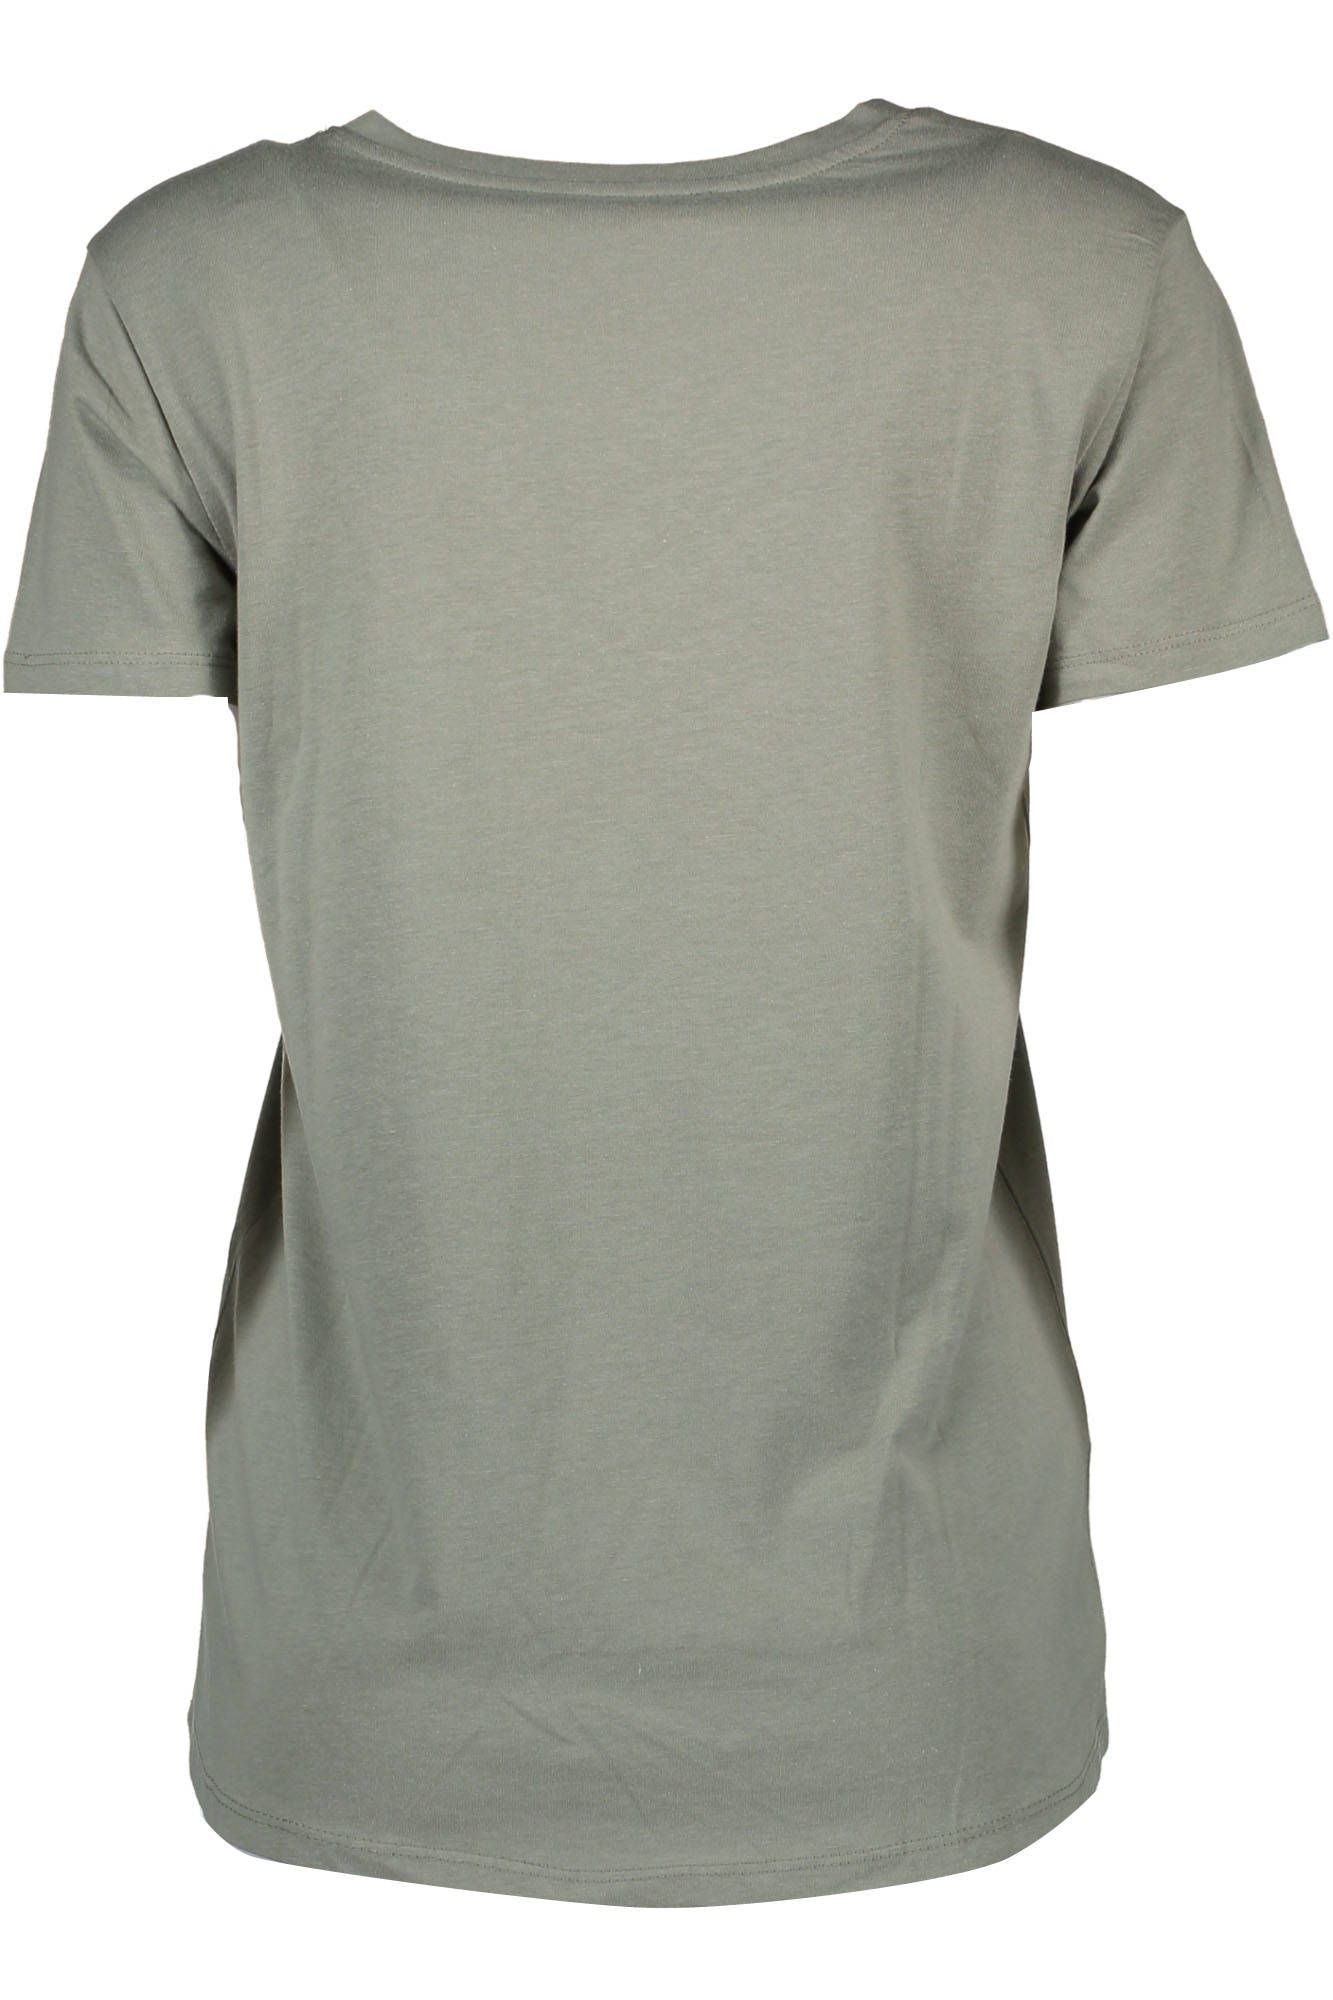 Silvian Heach Chic V-Neck Green Tee with Logo Detailing